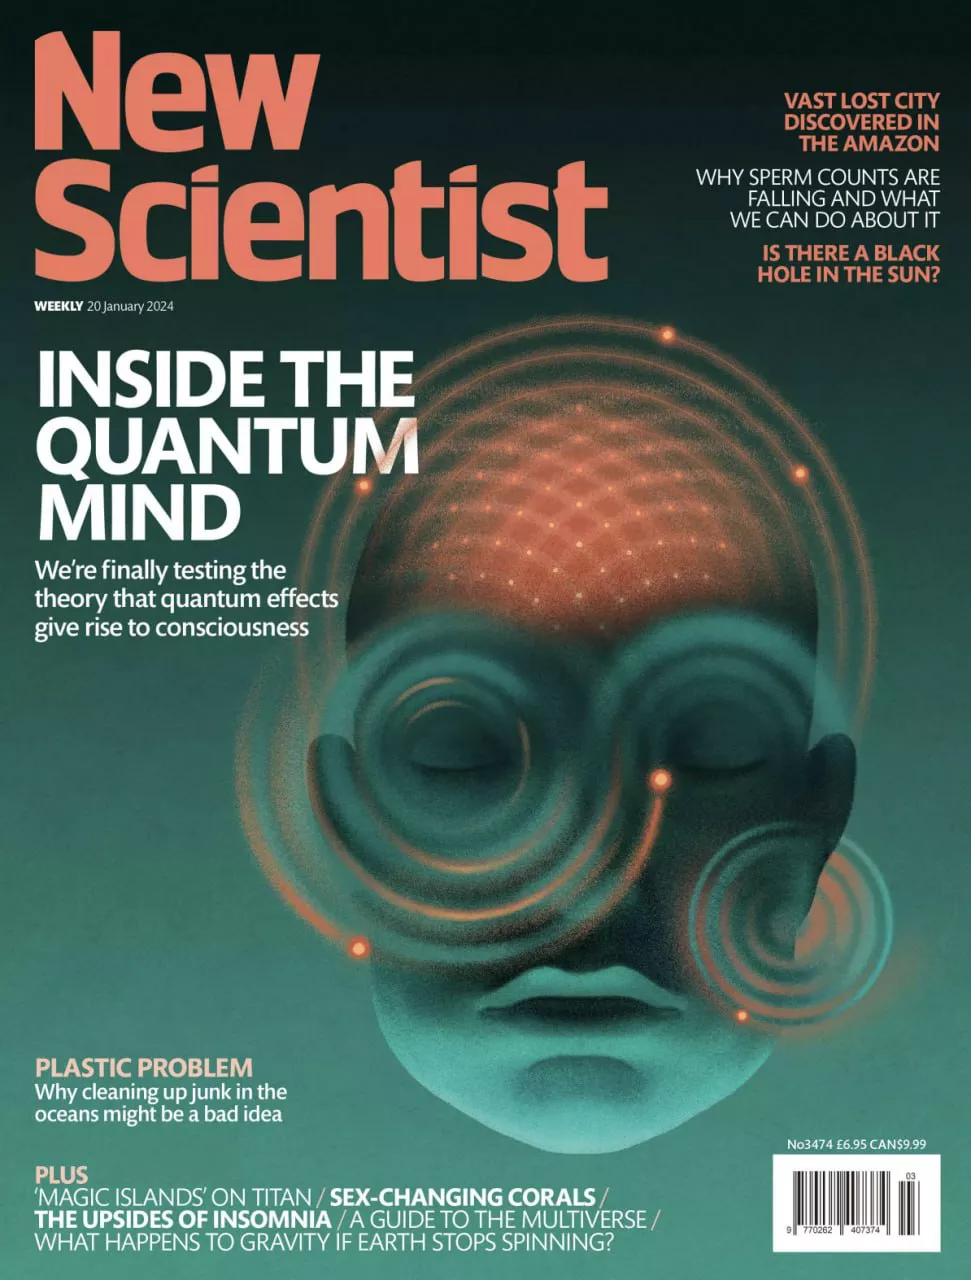 New Scientist - 20 January 2024 (science)